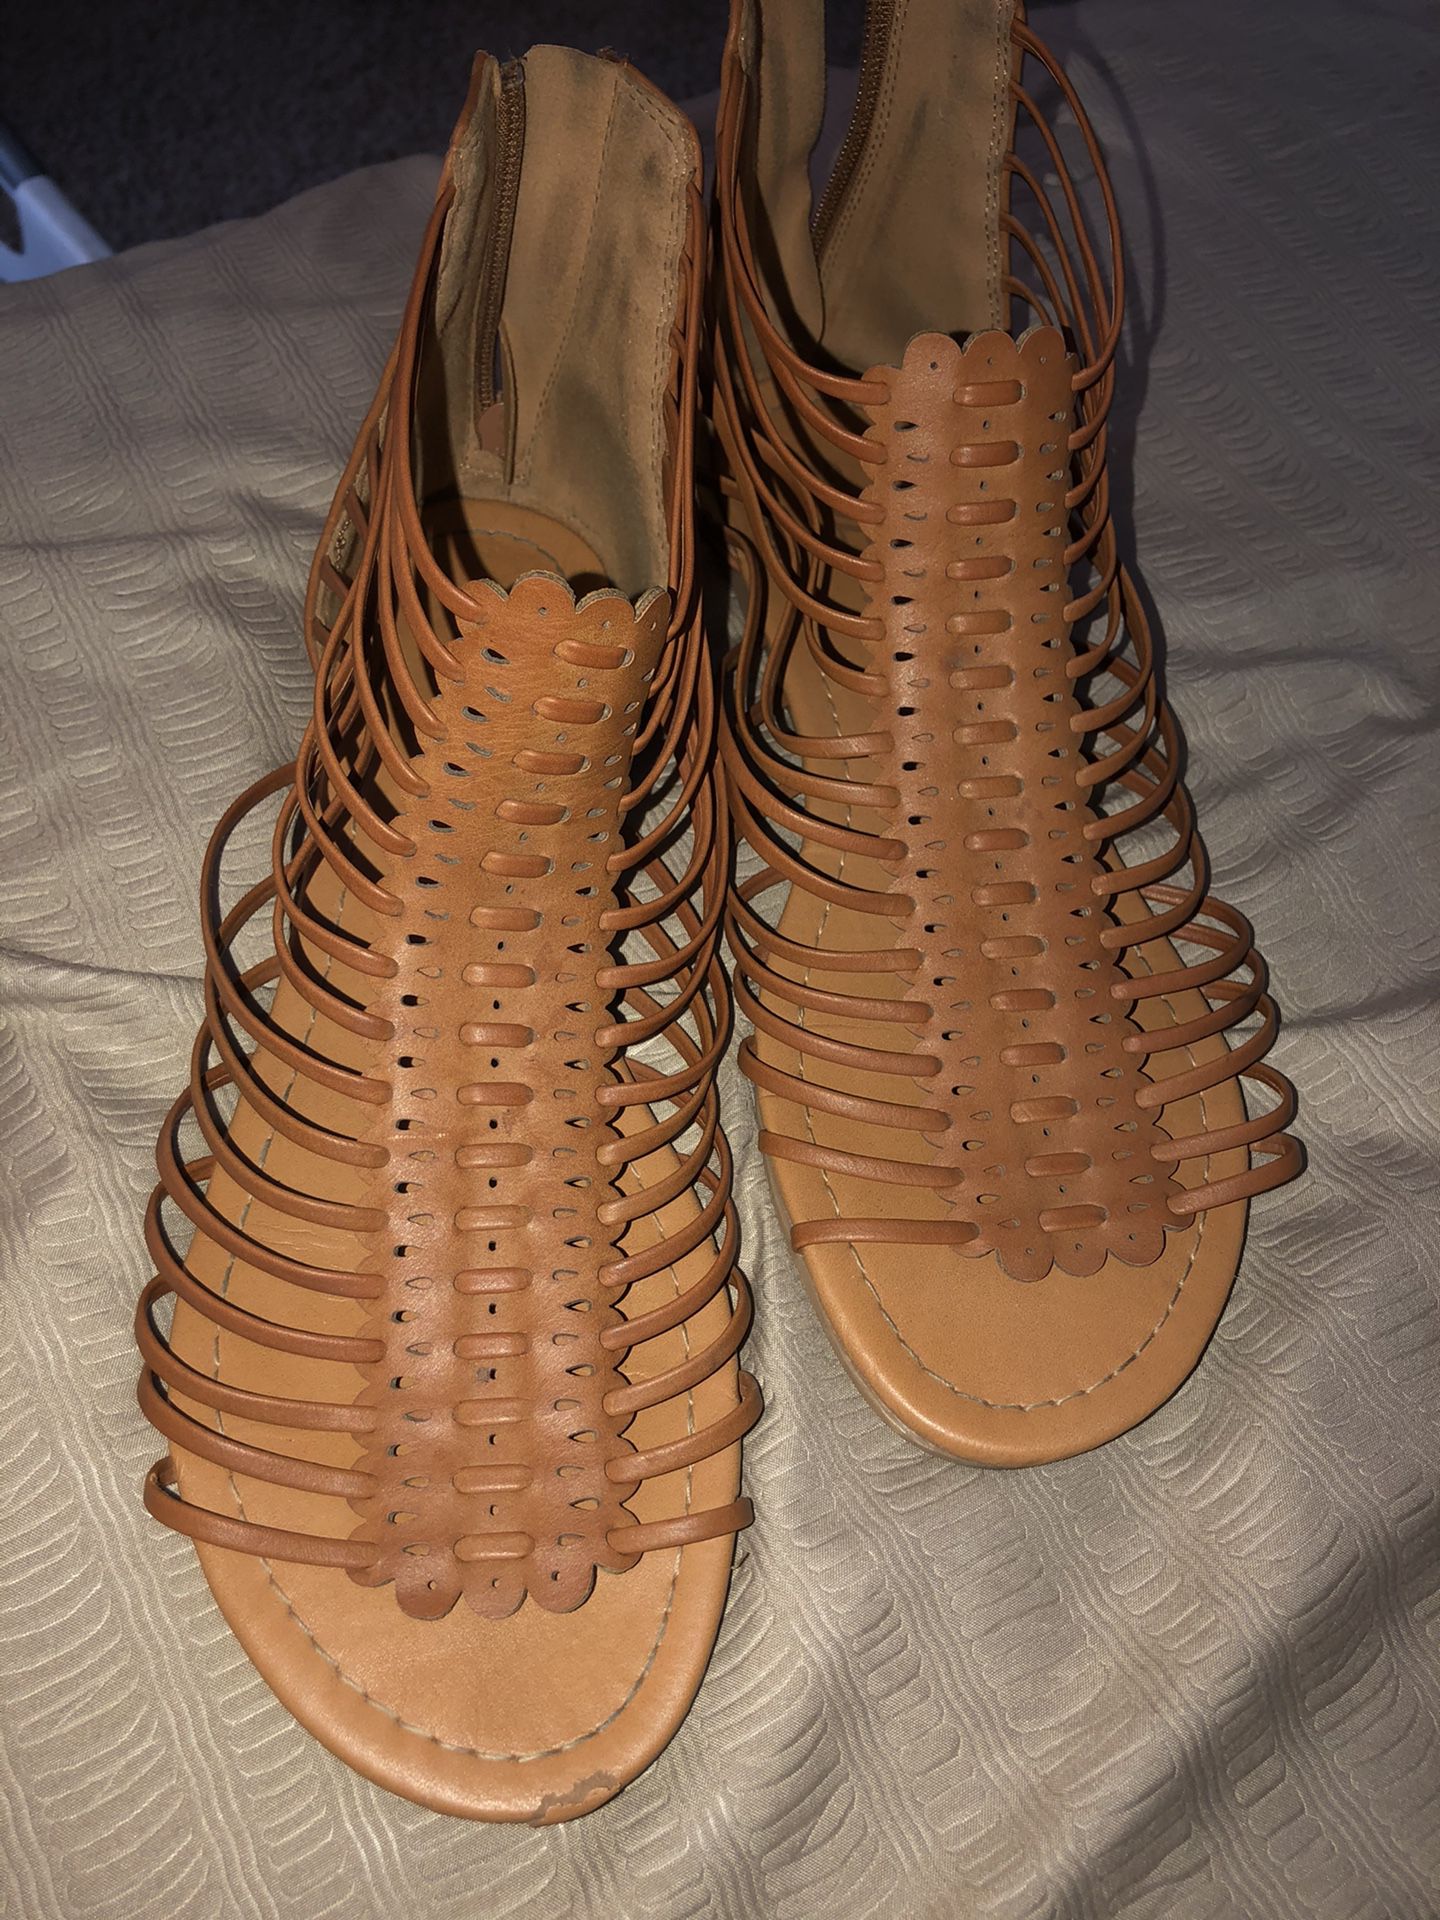 Free size 9 sandals